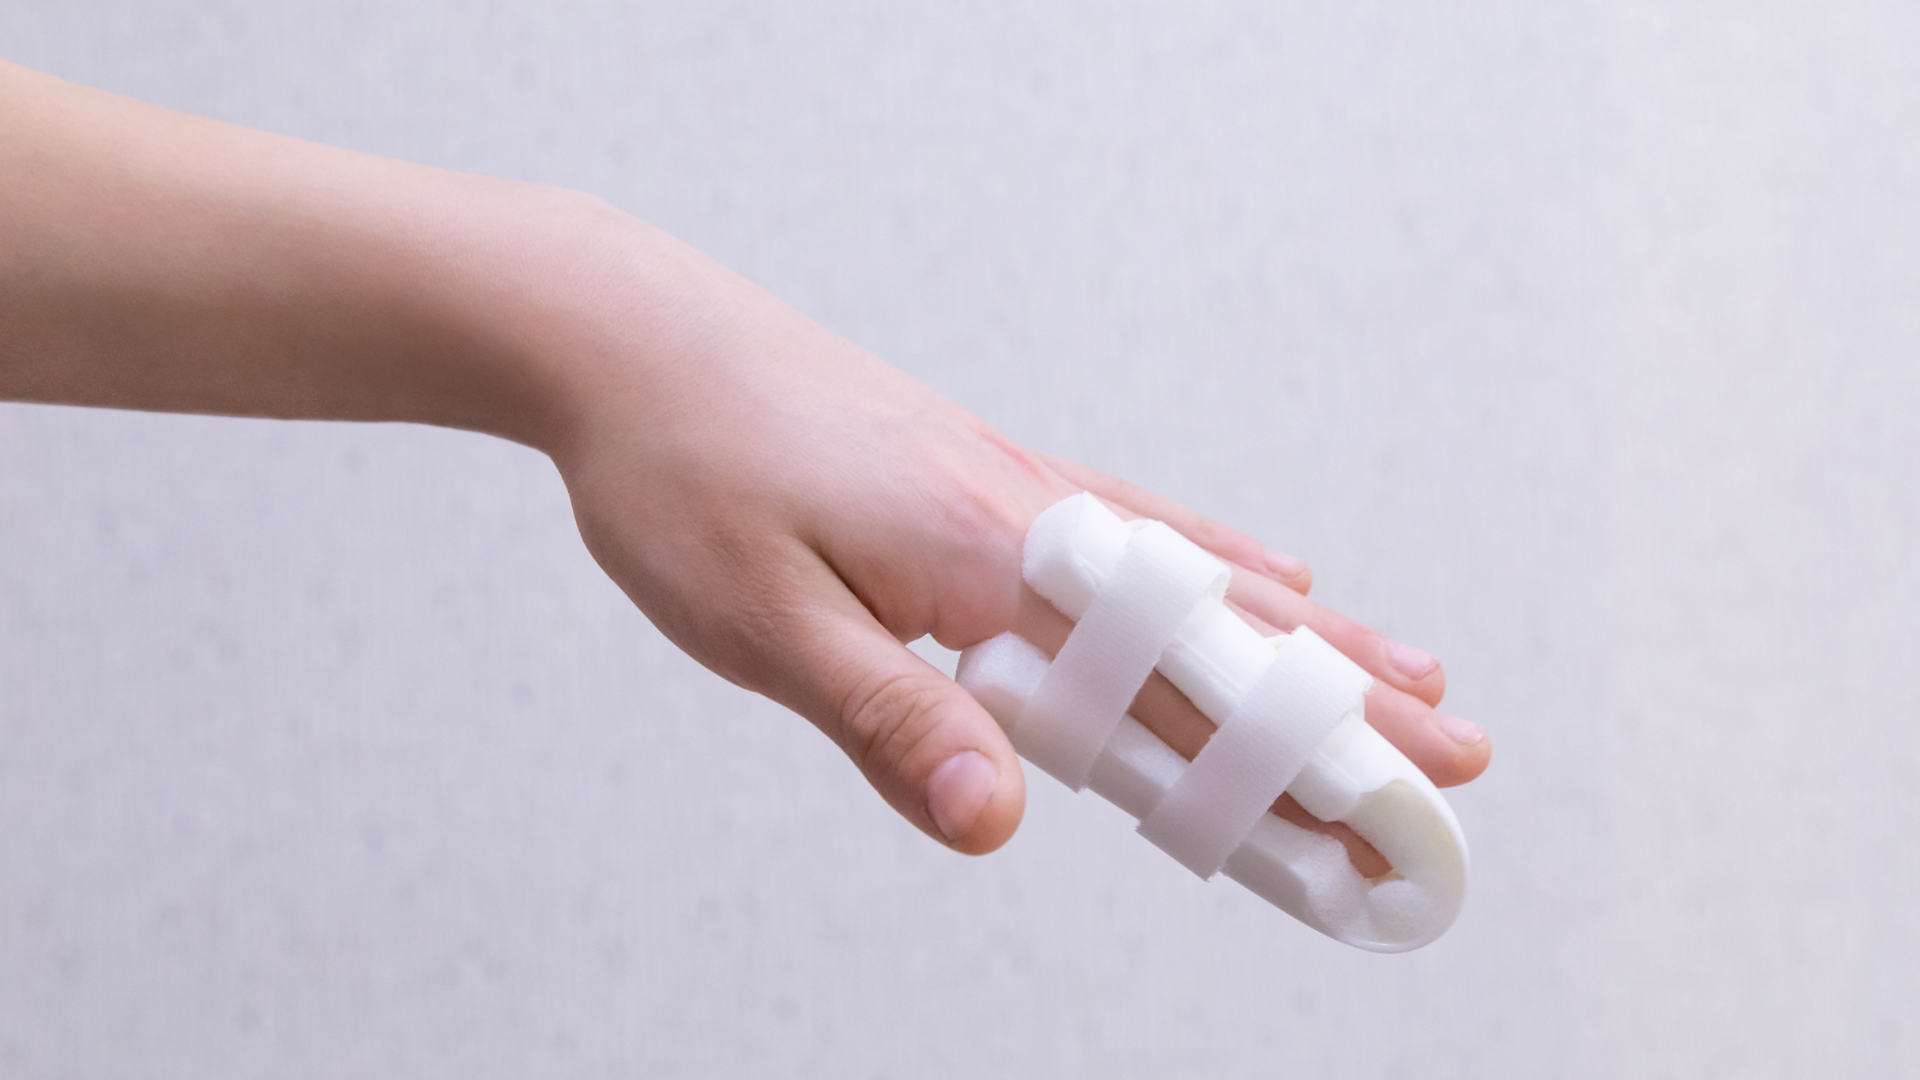 Fingertip Injuries: From Industrial Accidents to Medical Mishaps